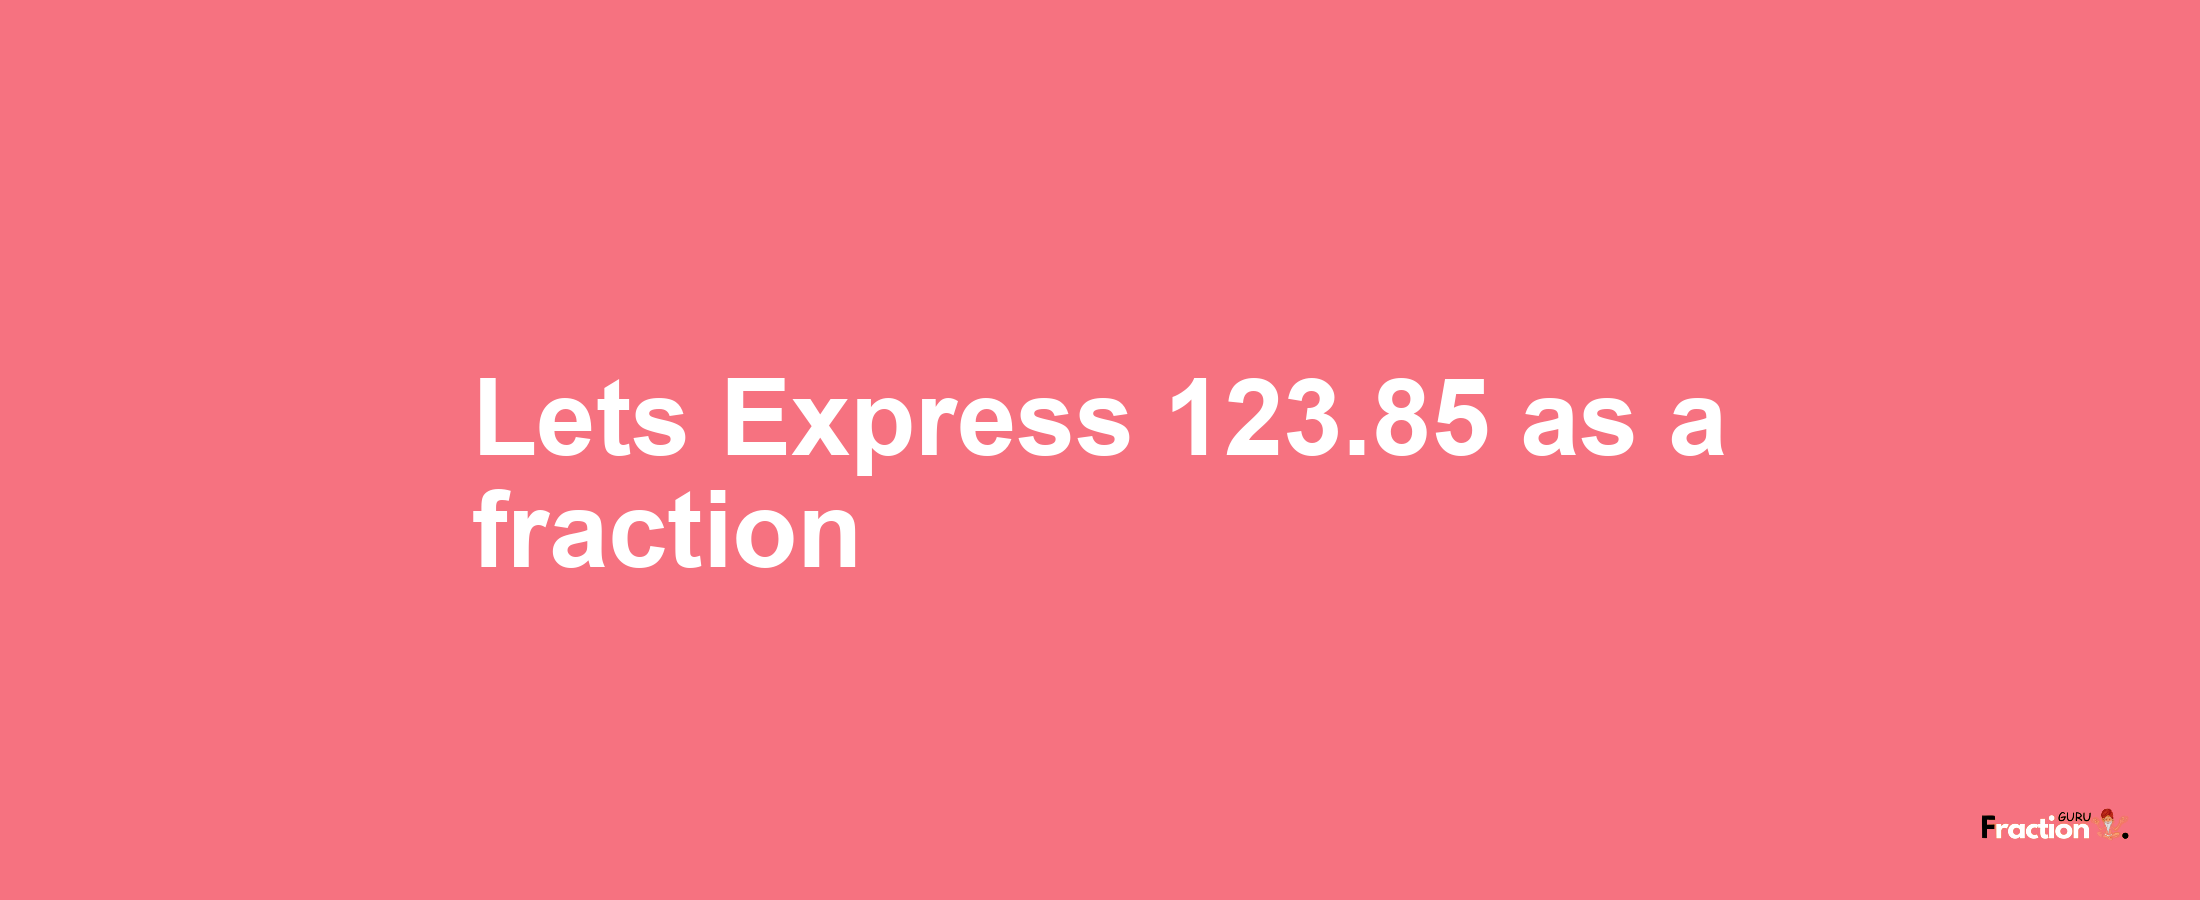 Lets Express 123.85 as afraction